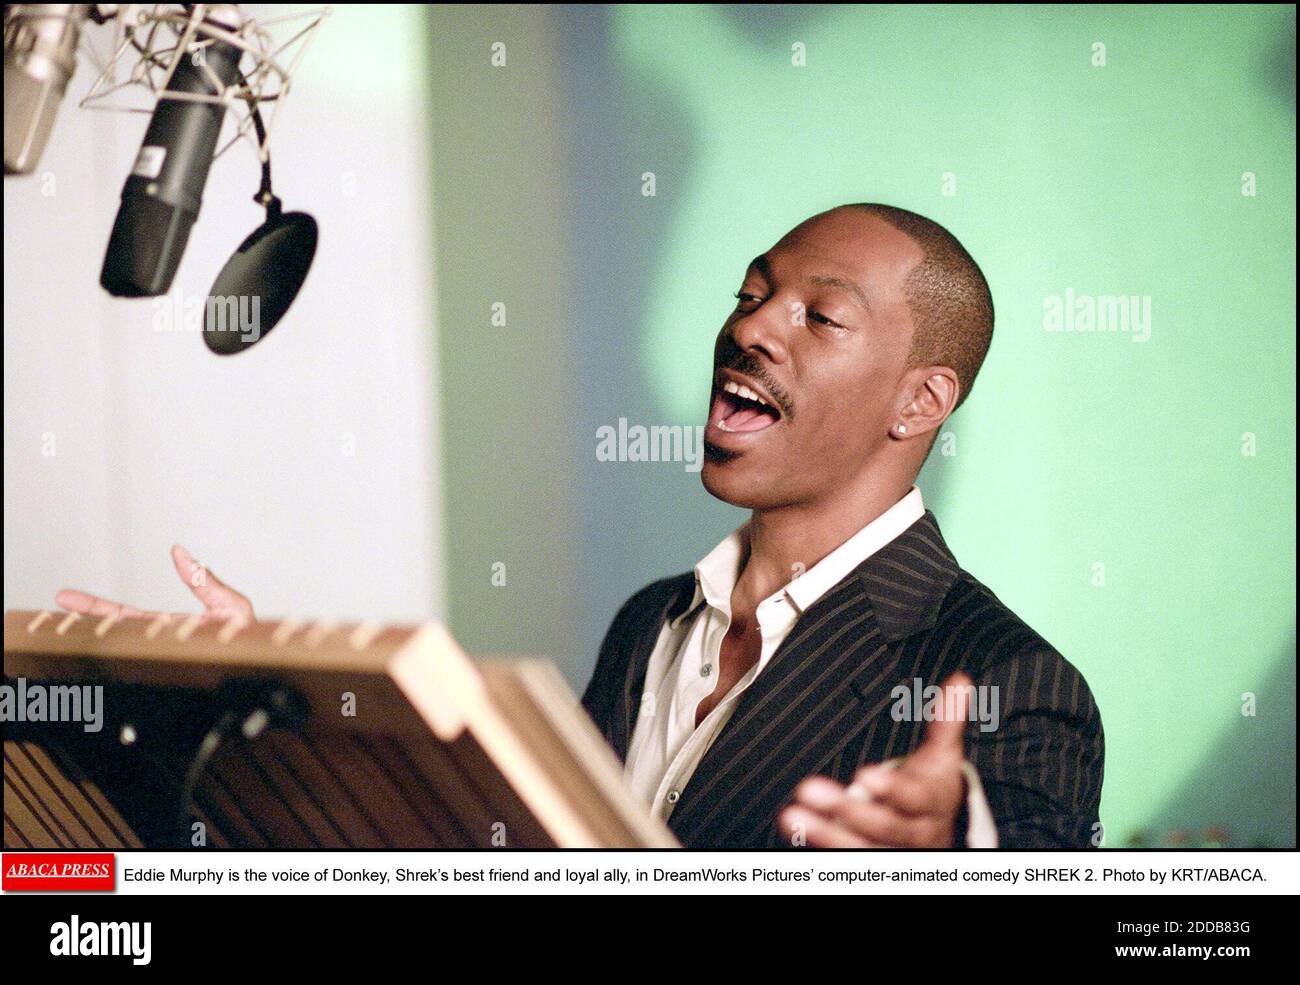 NO FILM, NO VIDEO, NO TV, NO DOCUMENTARY - Eddie Murphy is the voice of Donkey, Shrek's best friend and loyal ally, in DreamWorks Pictures' computer-animated comedy SHREK 2. Photo by KRT/ABACA. Stock Photo